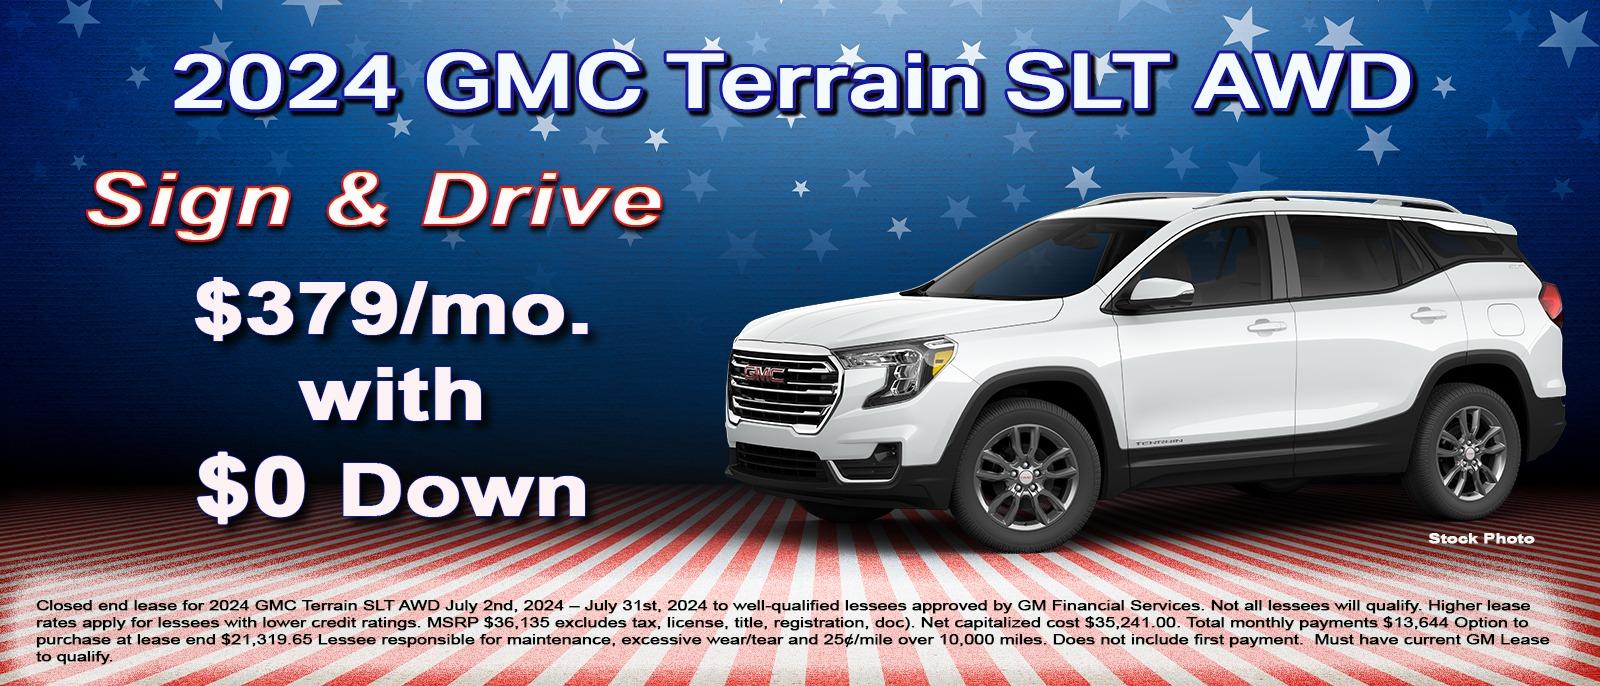 Sign and Drive on your new GMC Terrain and only $379 per month